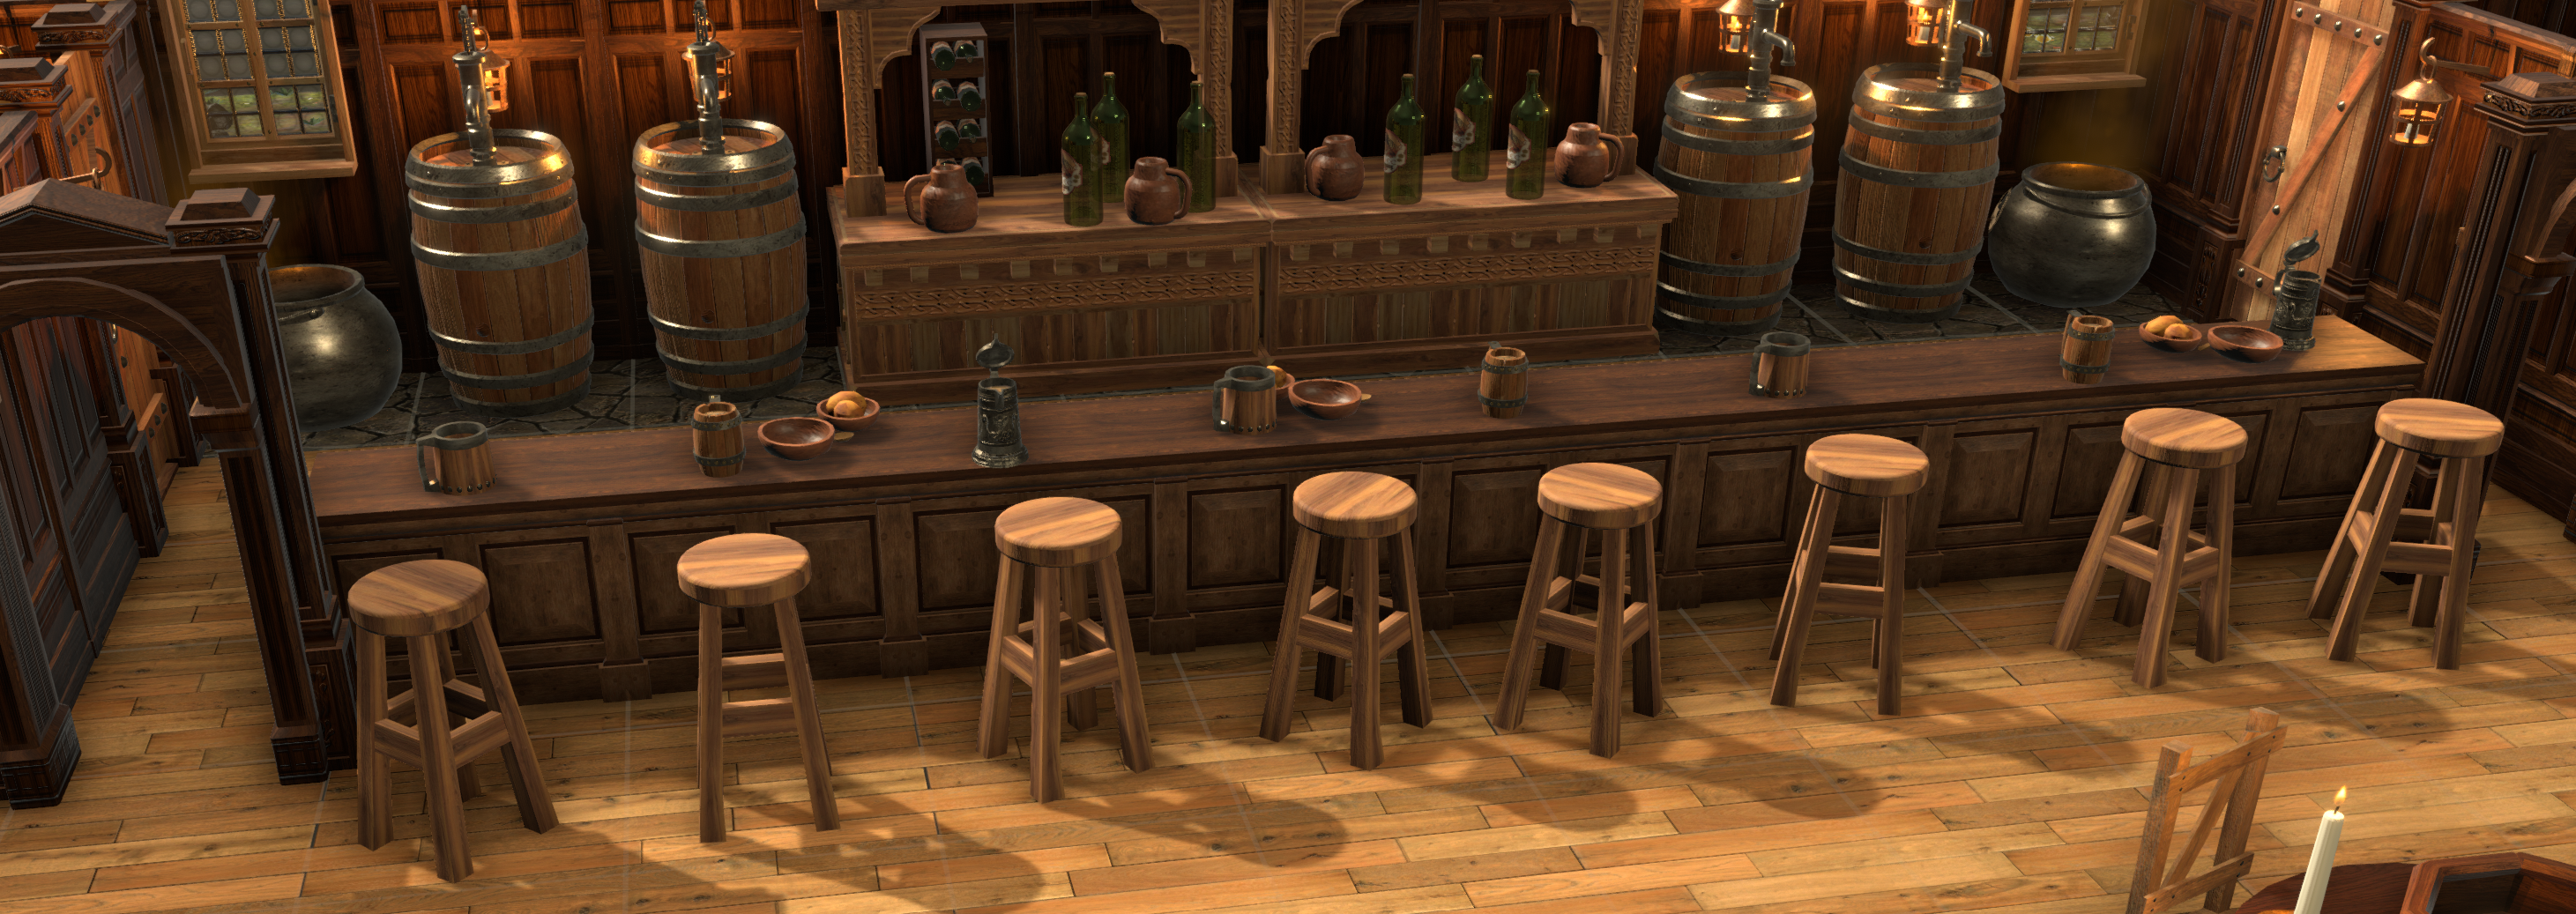 Kenderfoot Hearth Bar.png